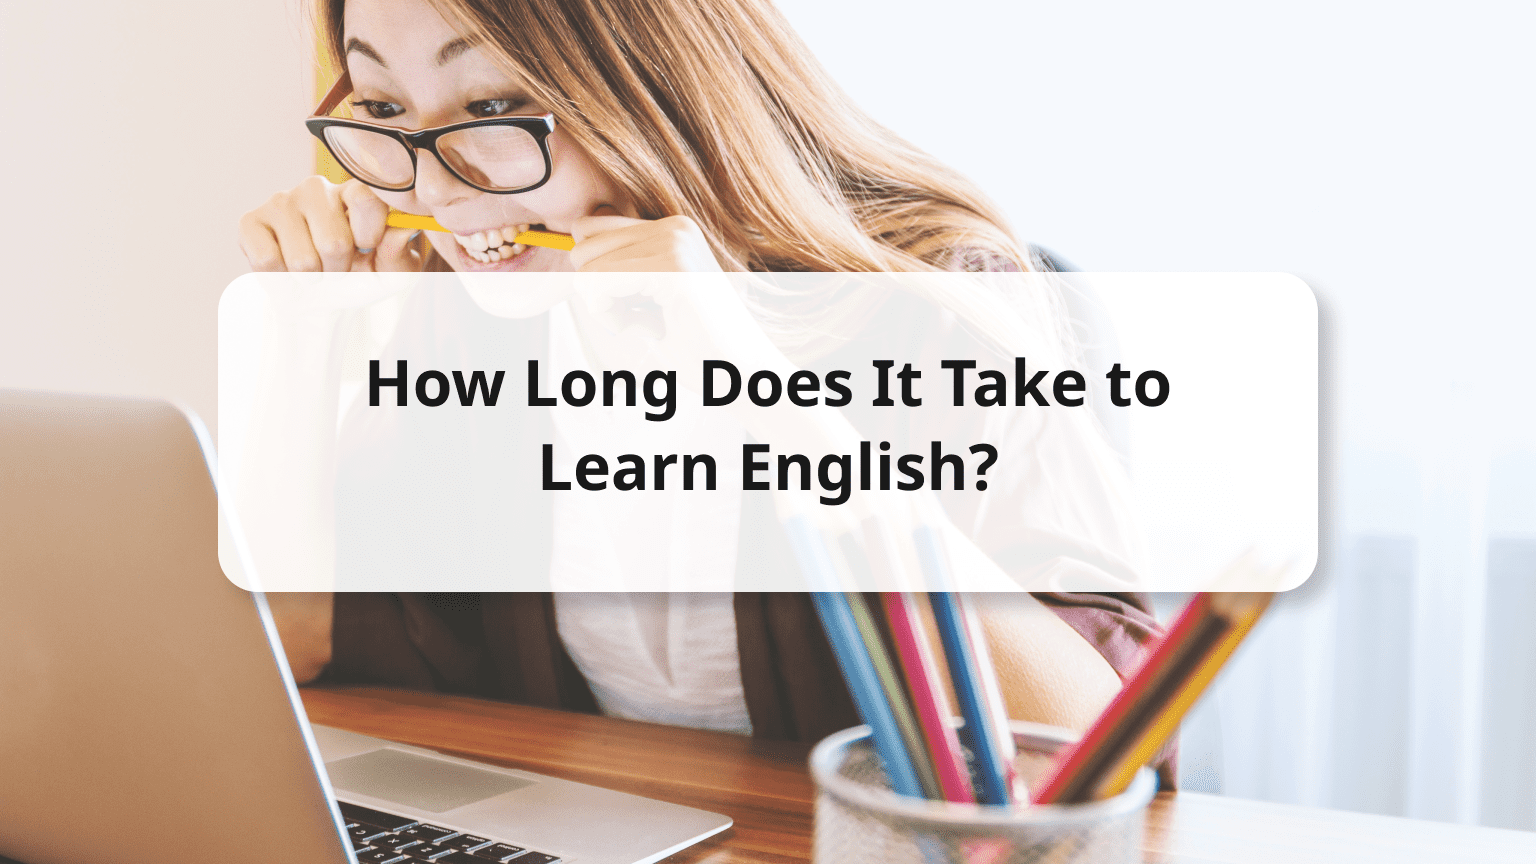 how-long-does-it-take-to-learn-english-scientifically-based-answer